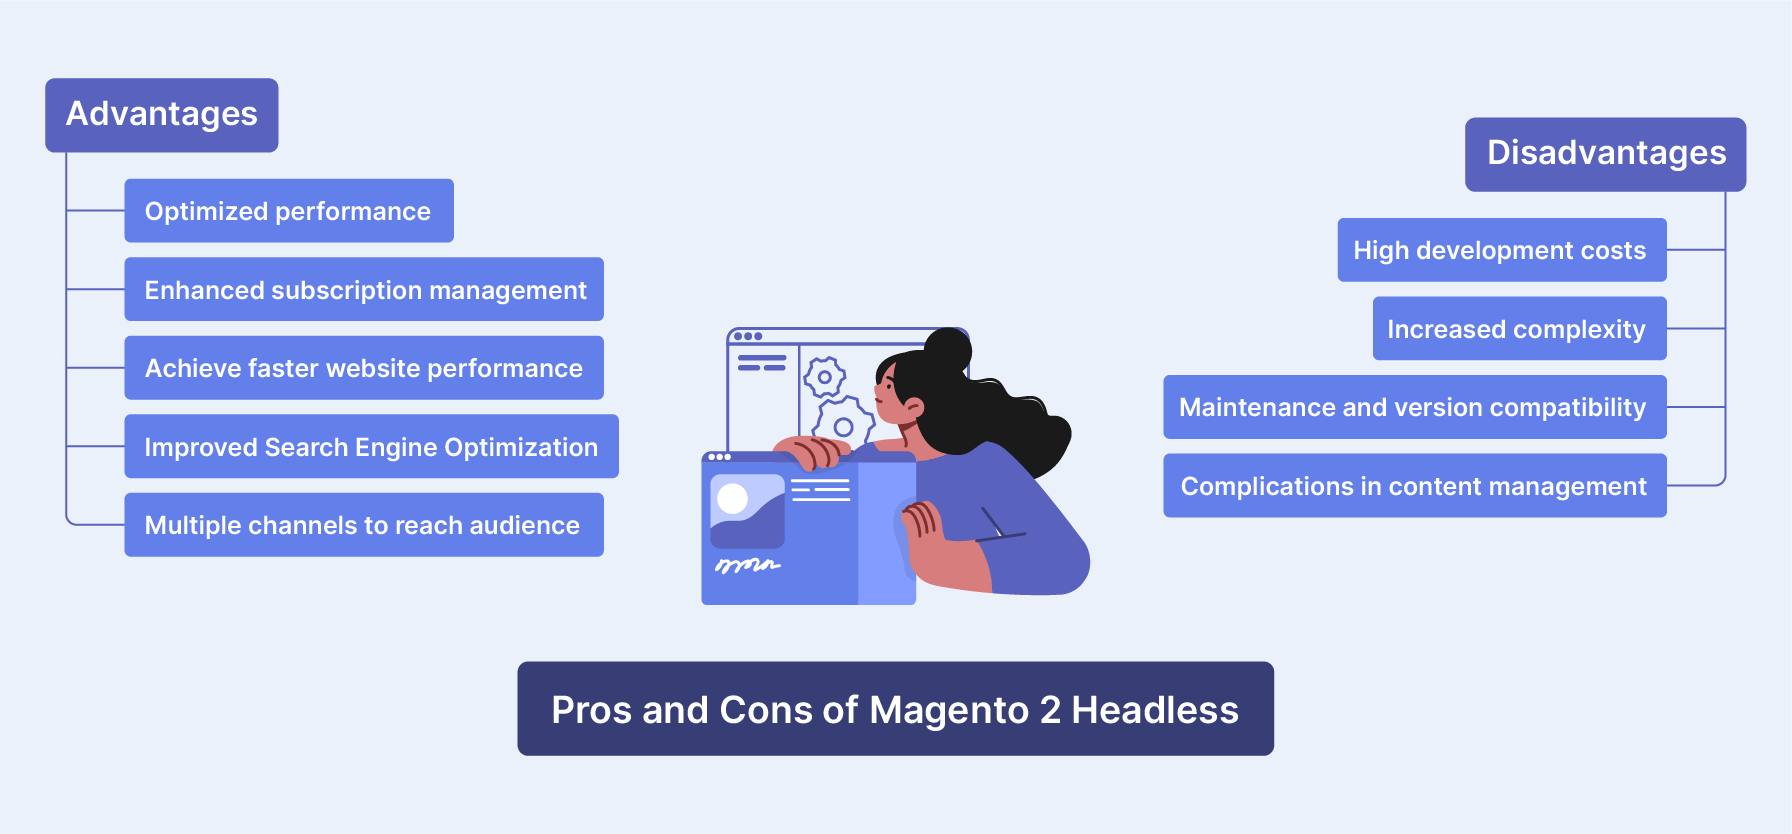 Comparative Analysis of Advantages and Disadvantages of Magento 2 Headless